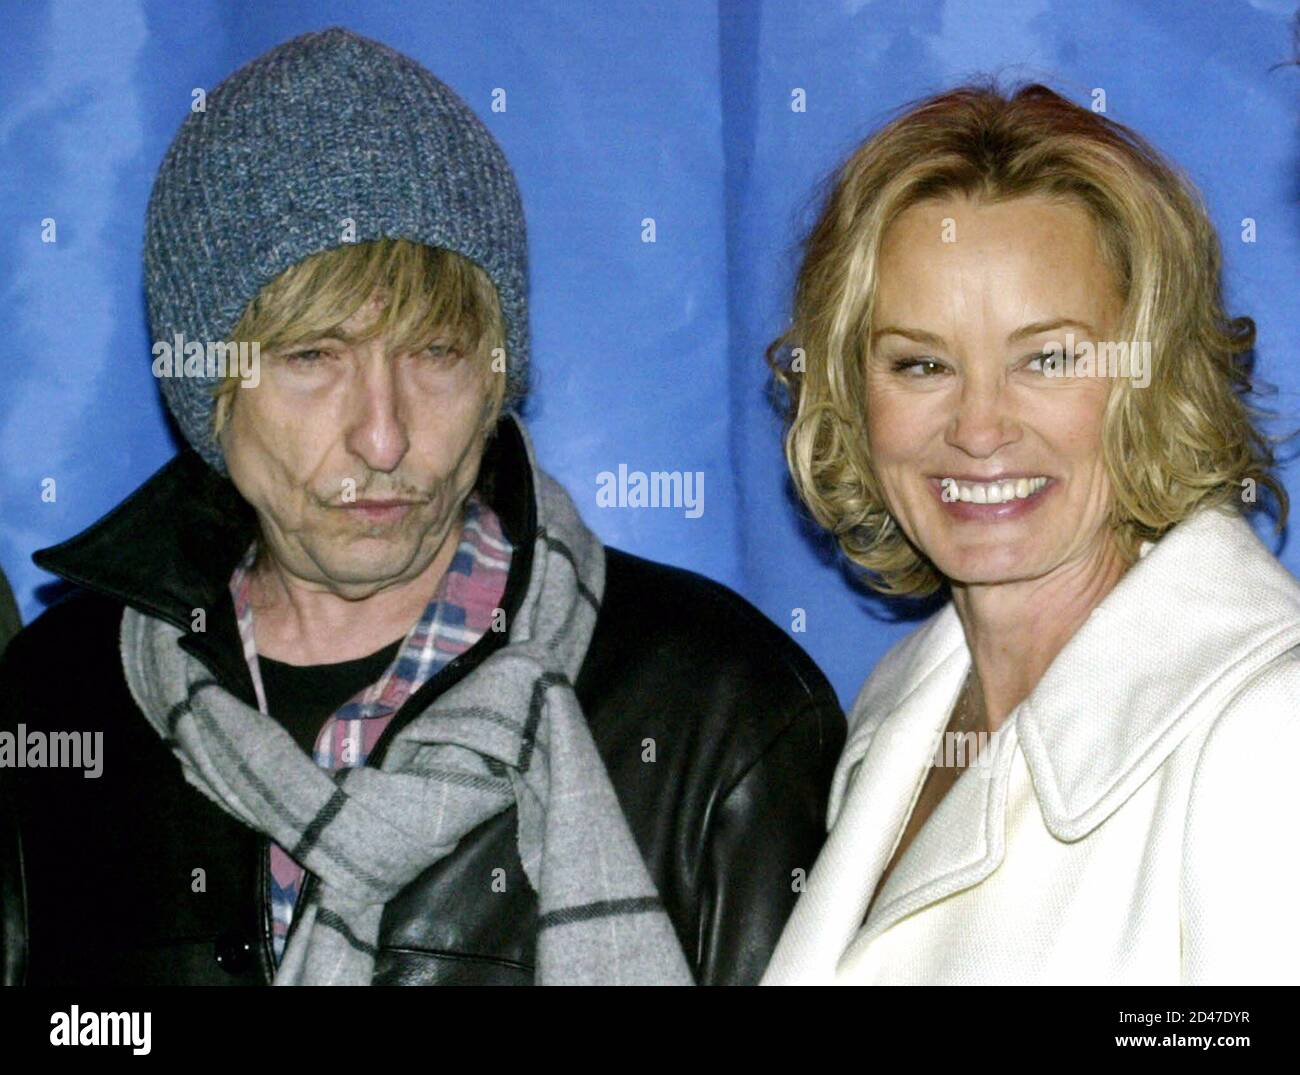 Singer Bob Dylan and actress Jessica Lange, cast members of the film "Masked  and Anonymous," pose during a photo call for the film in Park City, Utah,  January 22, 2003 at the